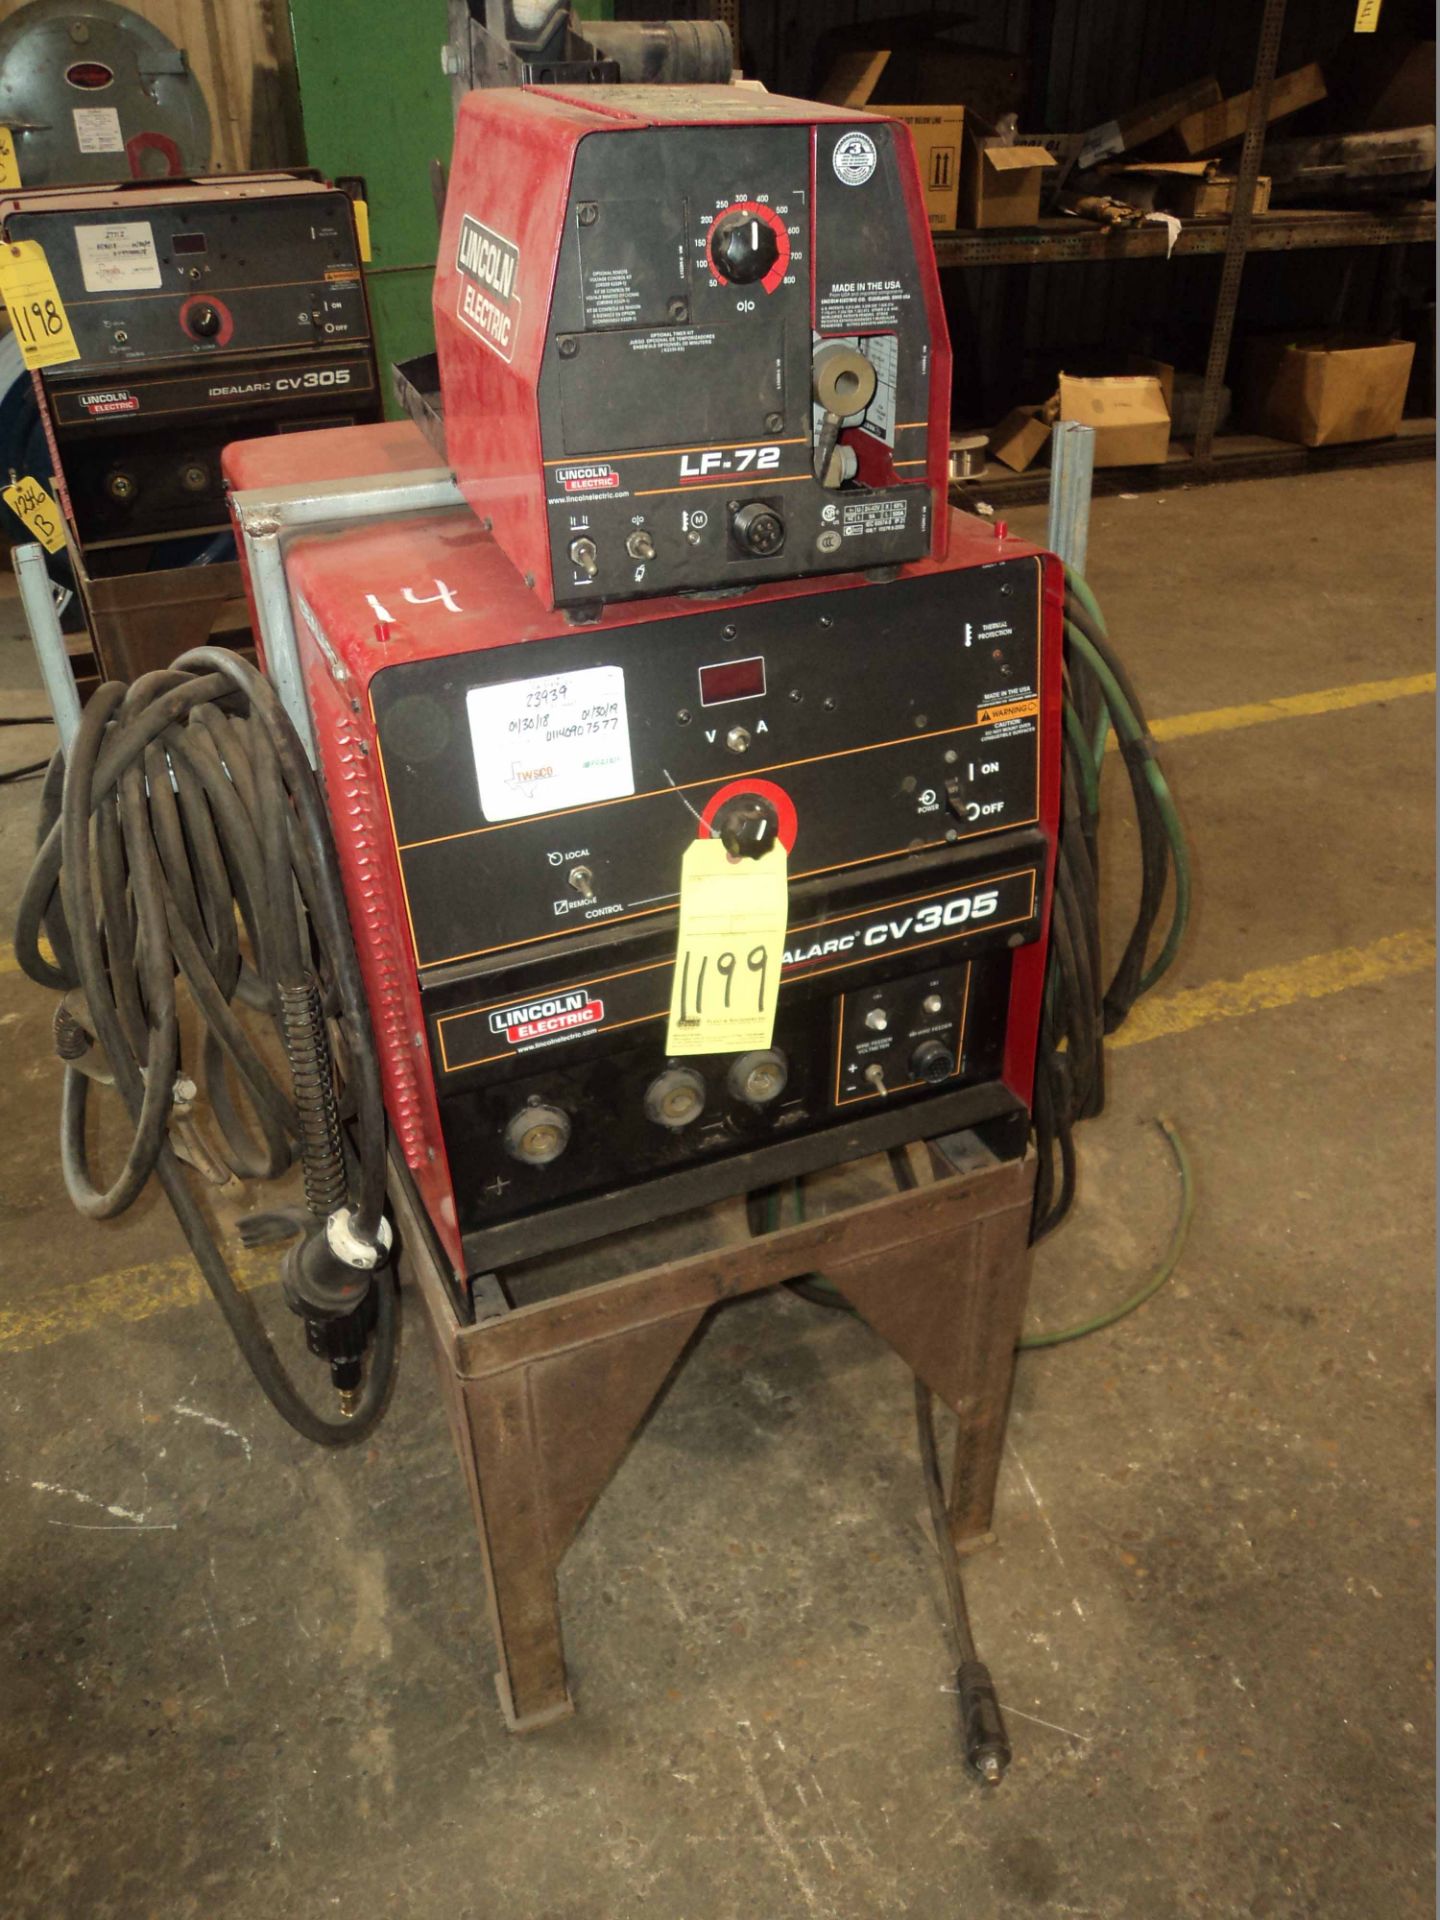 MIG WELDER, LINCOLN MDL. CV305, new 2014, 315 amps @ 32 v., 100% duty cycle, Lincoln Mdl.LF72 wire